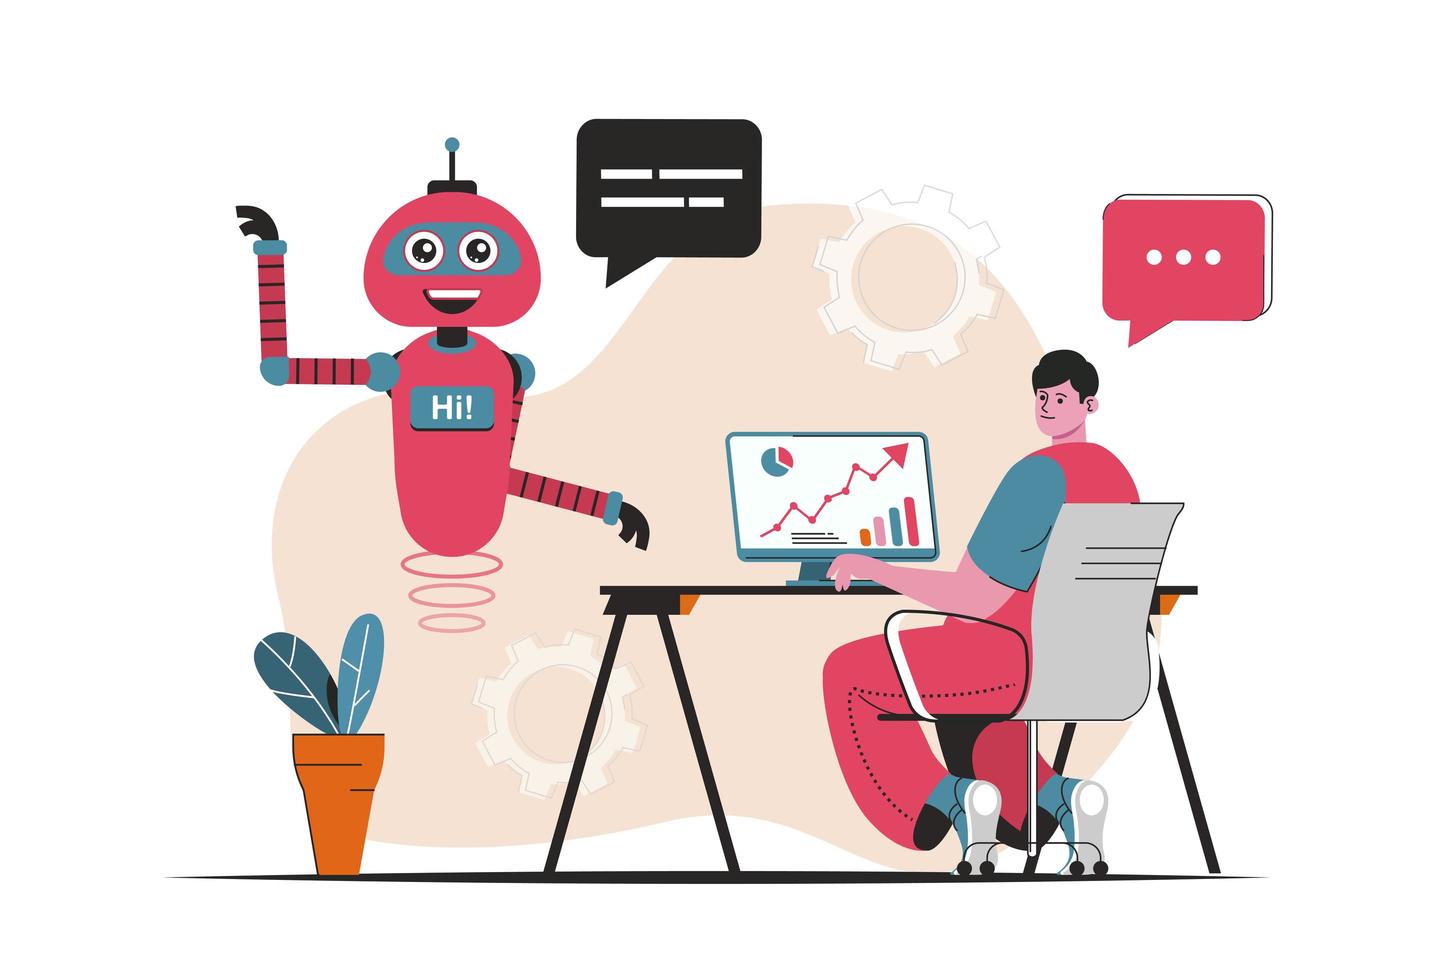 Virtual assistant concept isolated. Customer support by bots robots at online chats. People scene in flat cartoon design. Vector illustration for blogging, website, mobile app, promotional materials.